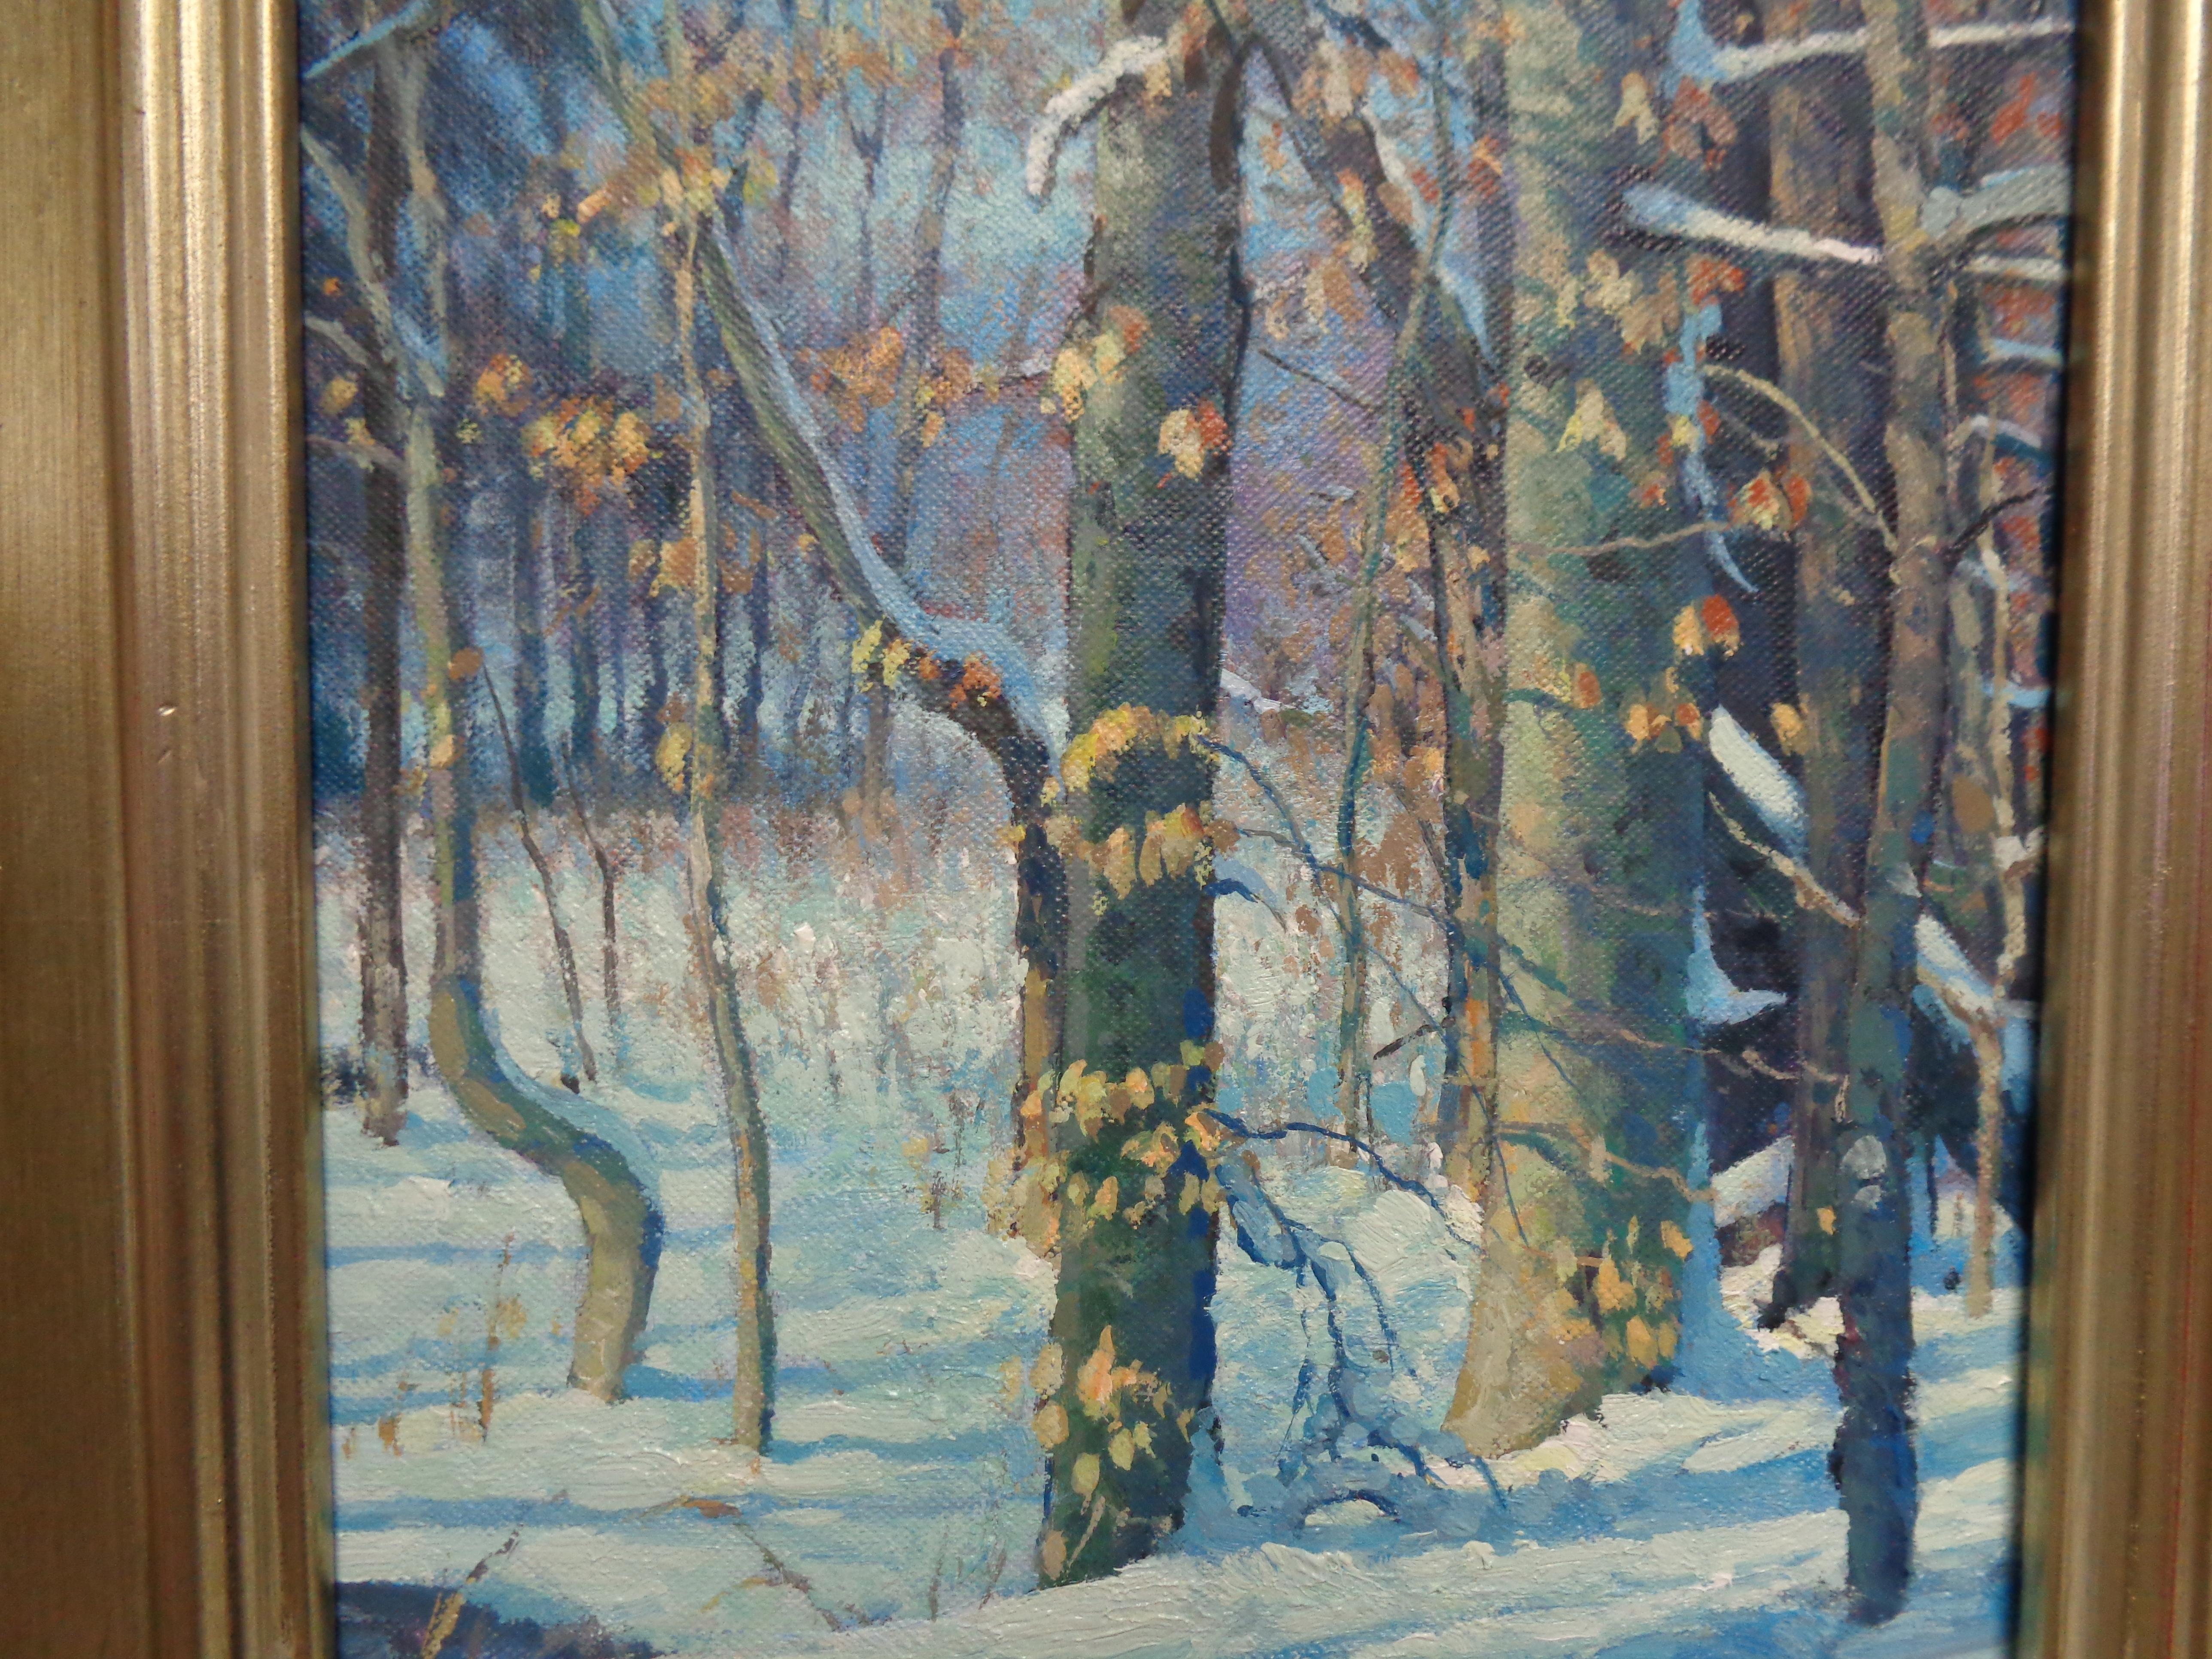   Winter Landscape Oil Painting by Michael Budden Winter Woodland Interior IV  For Sale 2